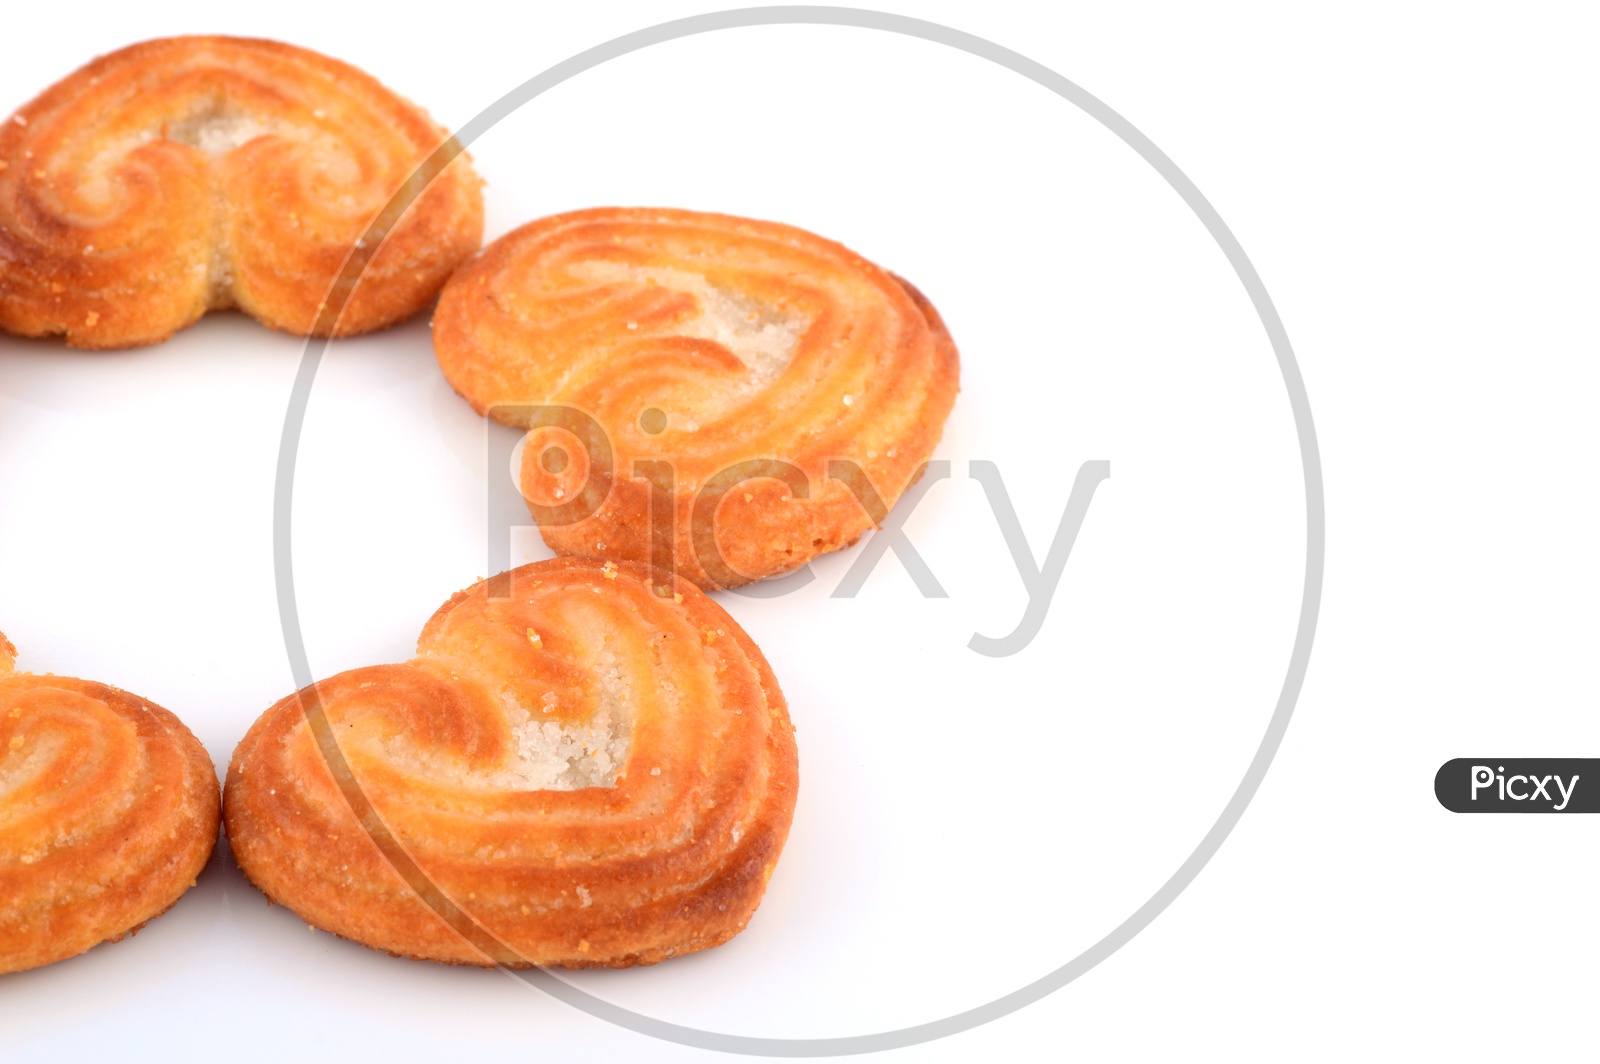 Heart shaped Biscuit (cookies) on white background